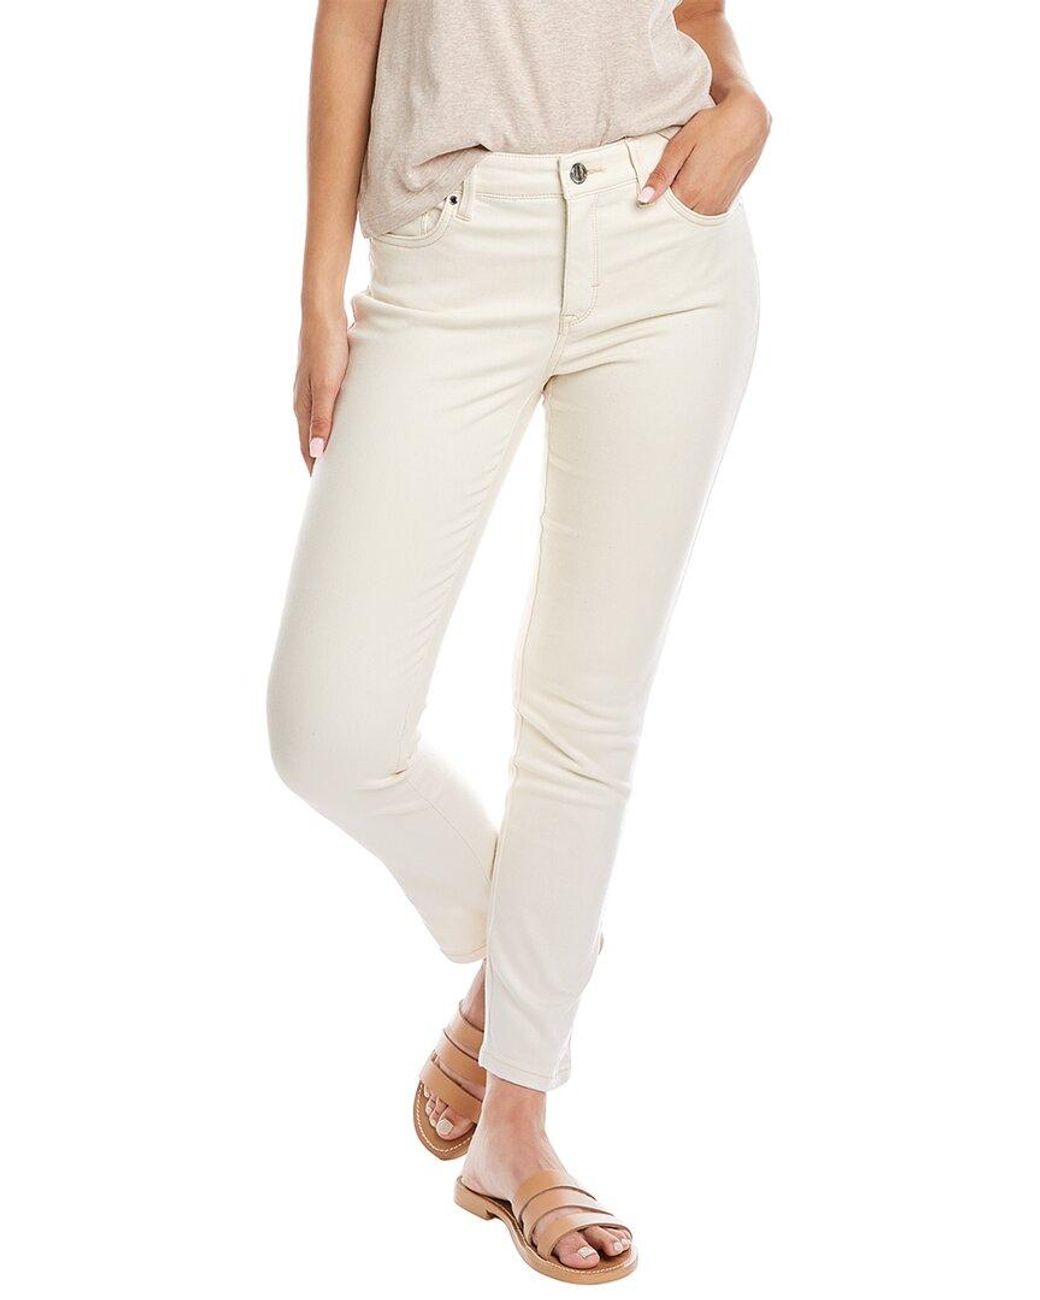 Tommy Bahama Boracay Bull Tux High-rise Ankle Jean in Natural | Lyst